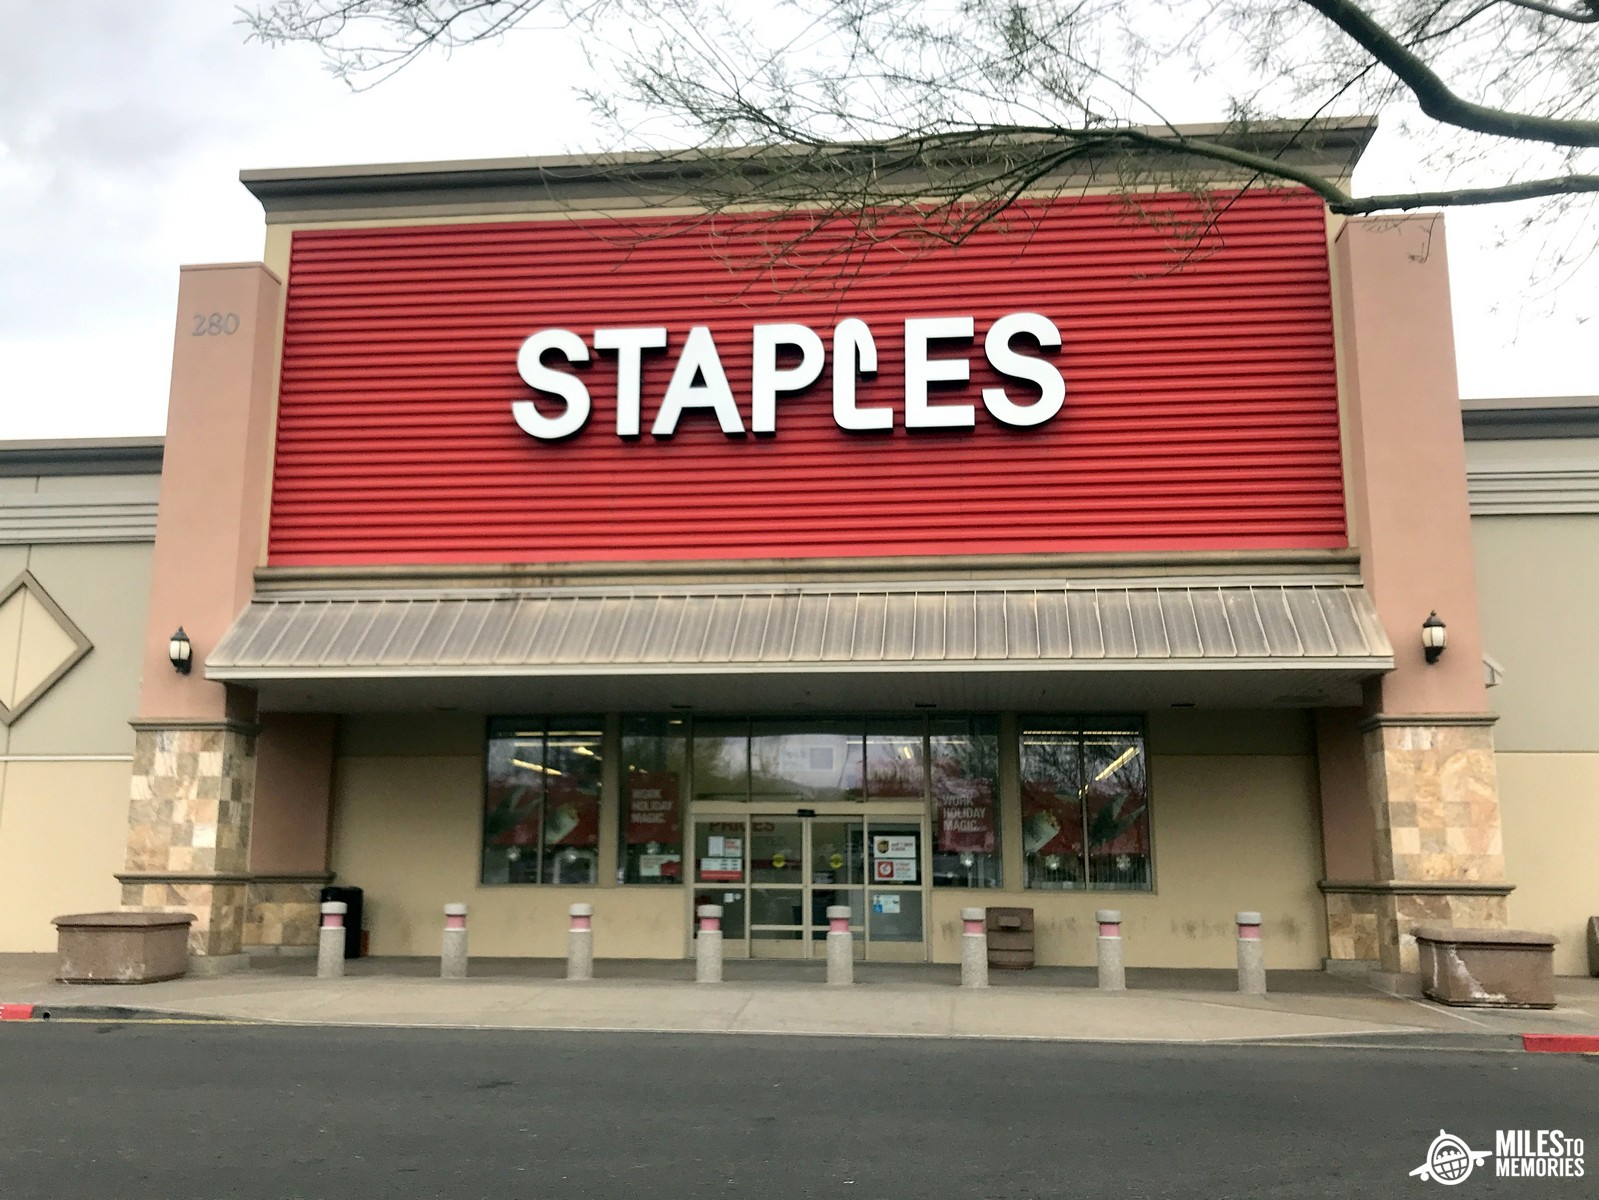 (Now Live) Easy 5X UR Points With Staples No Fee Mastercard Gift Card Deal